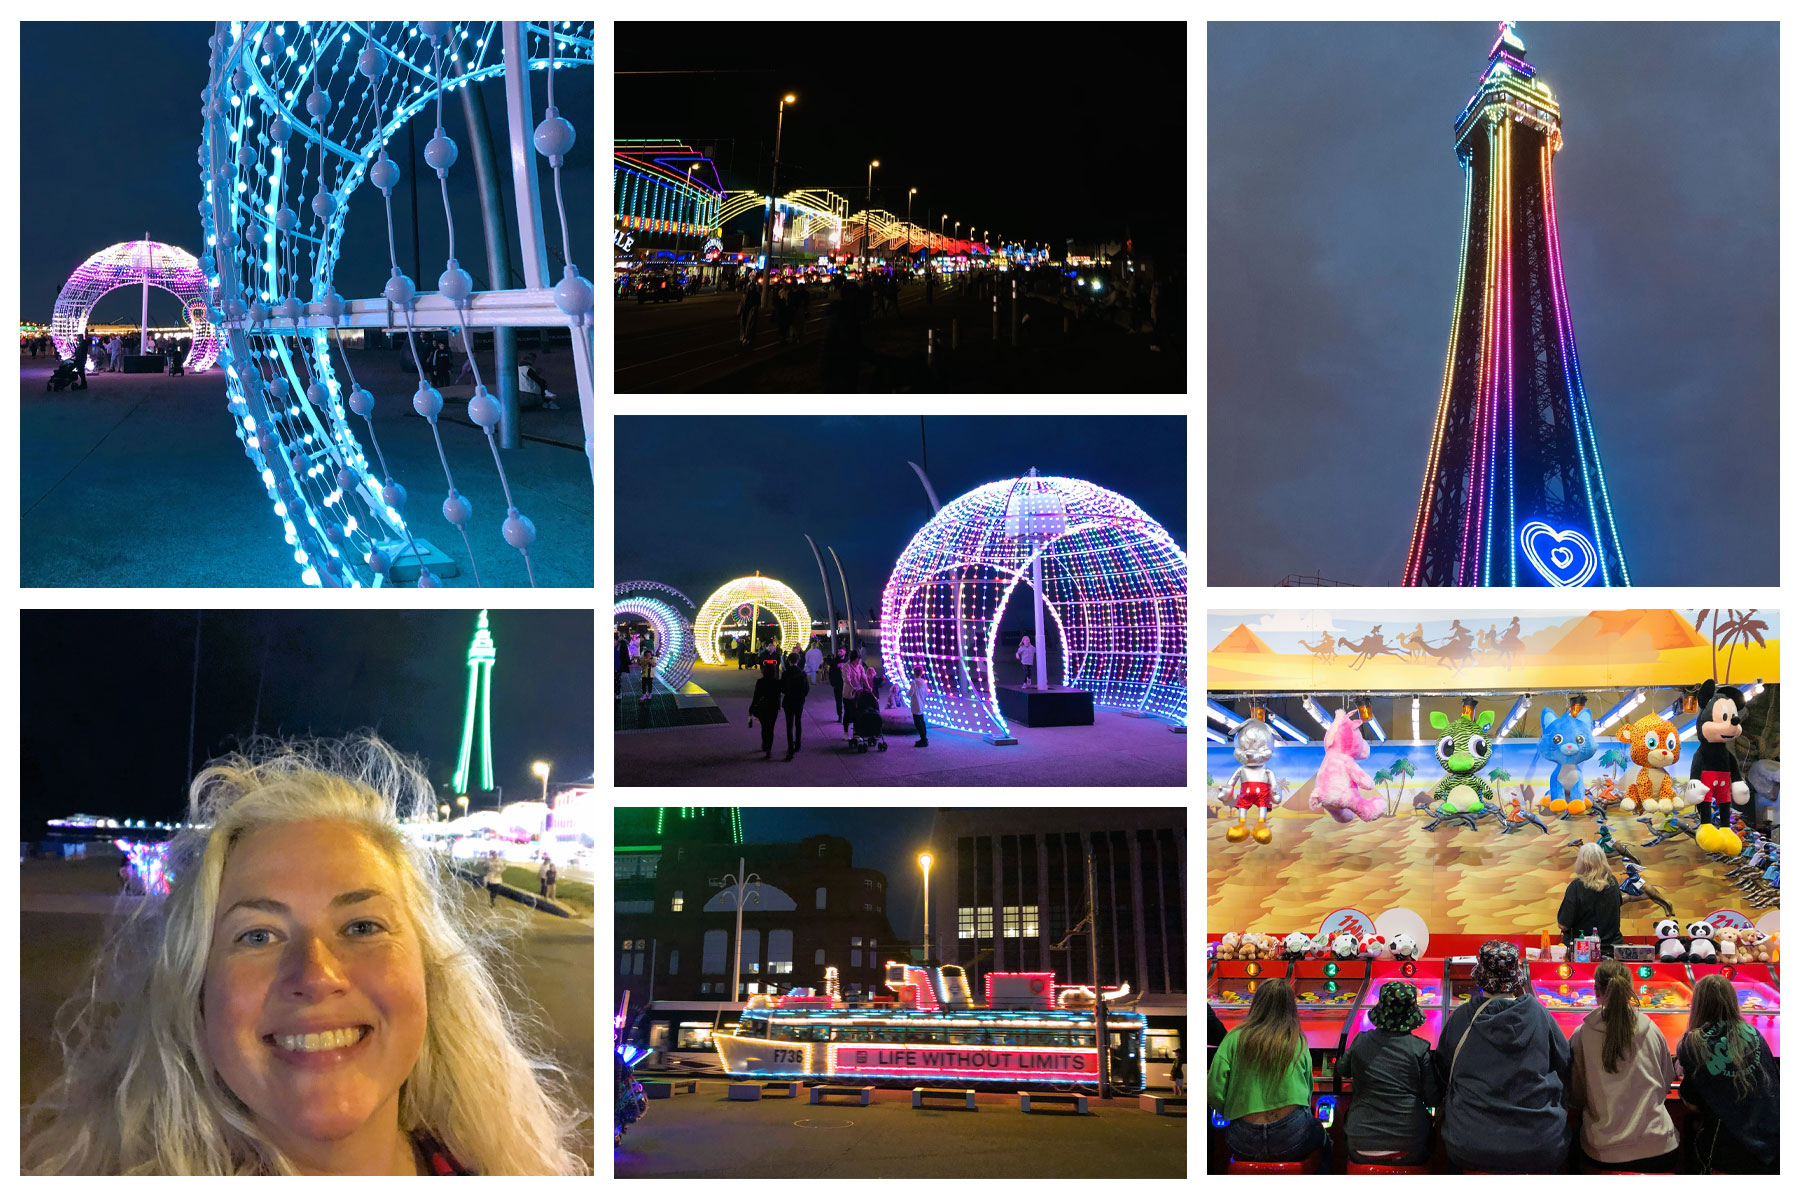 A collage of the blackpool illuminations at night, shining brightly